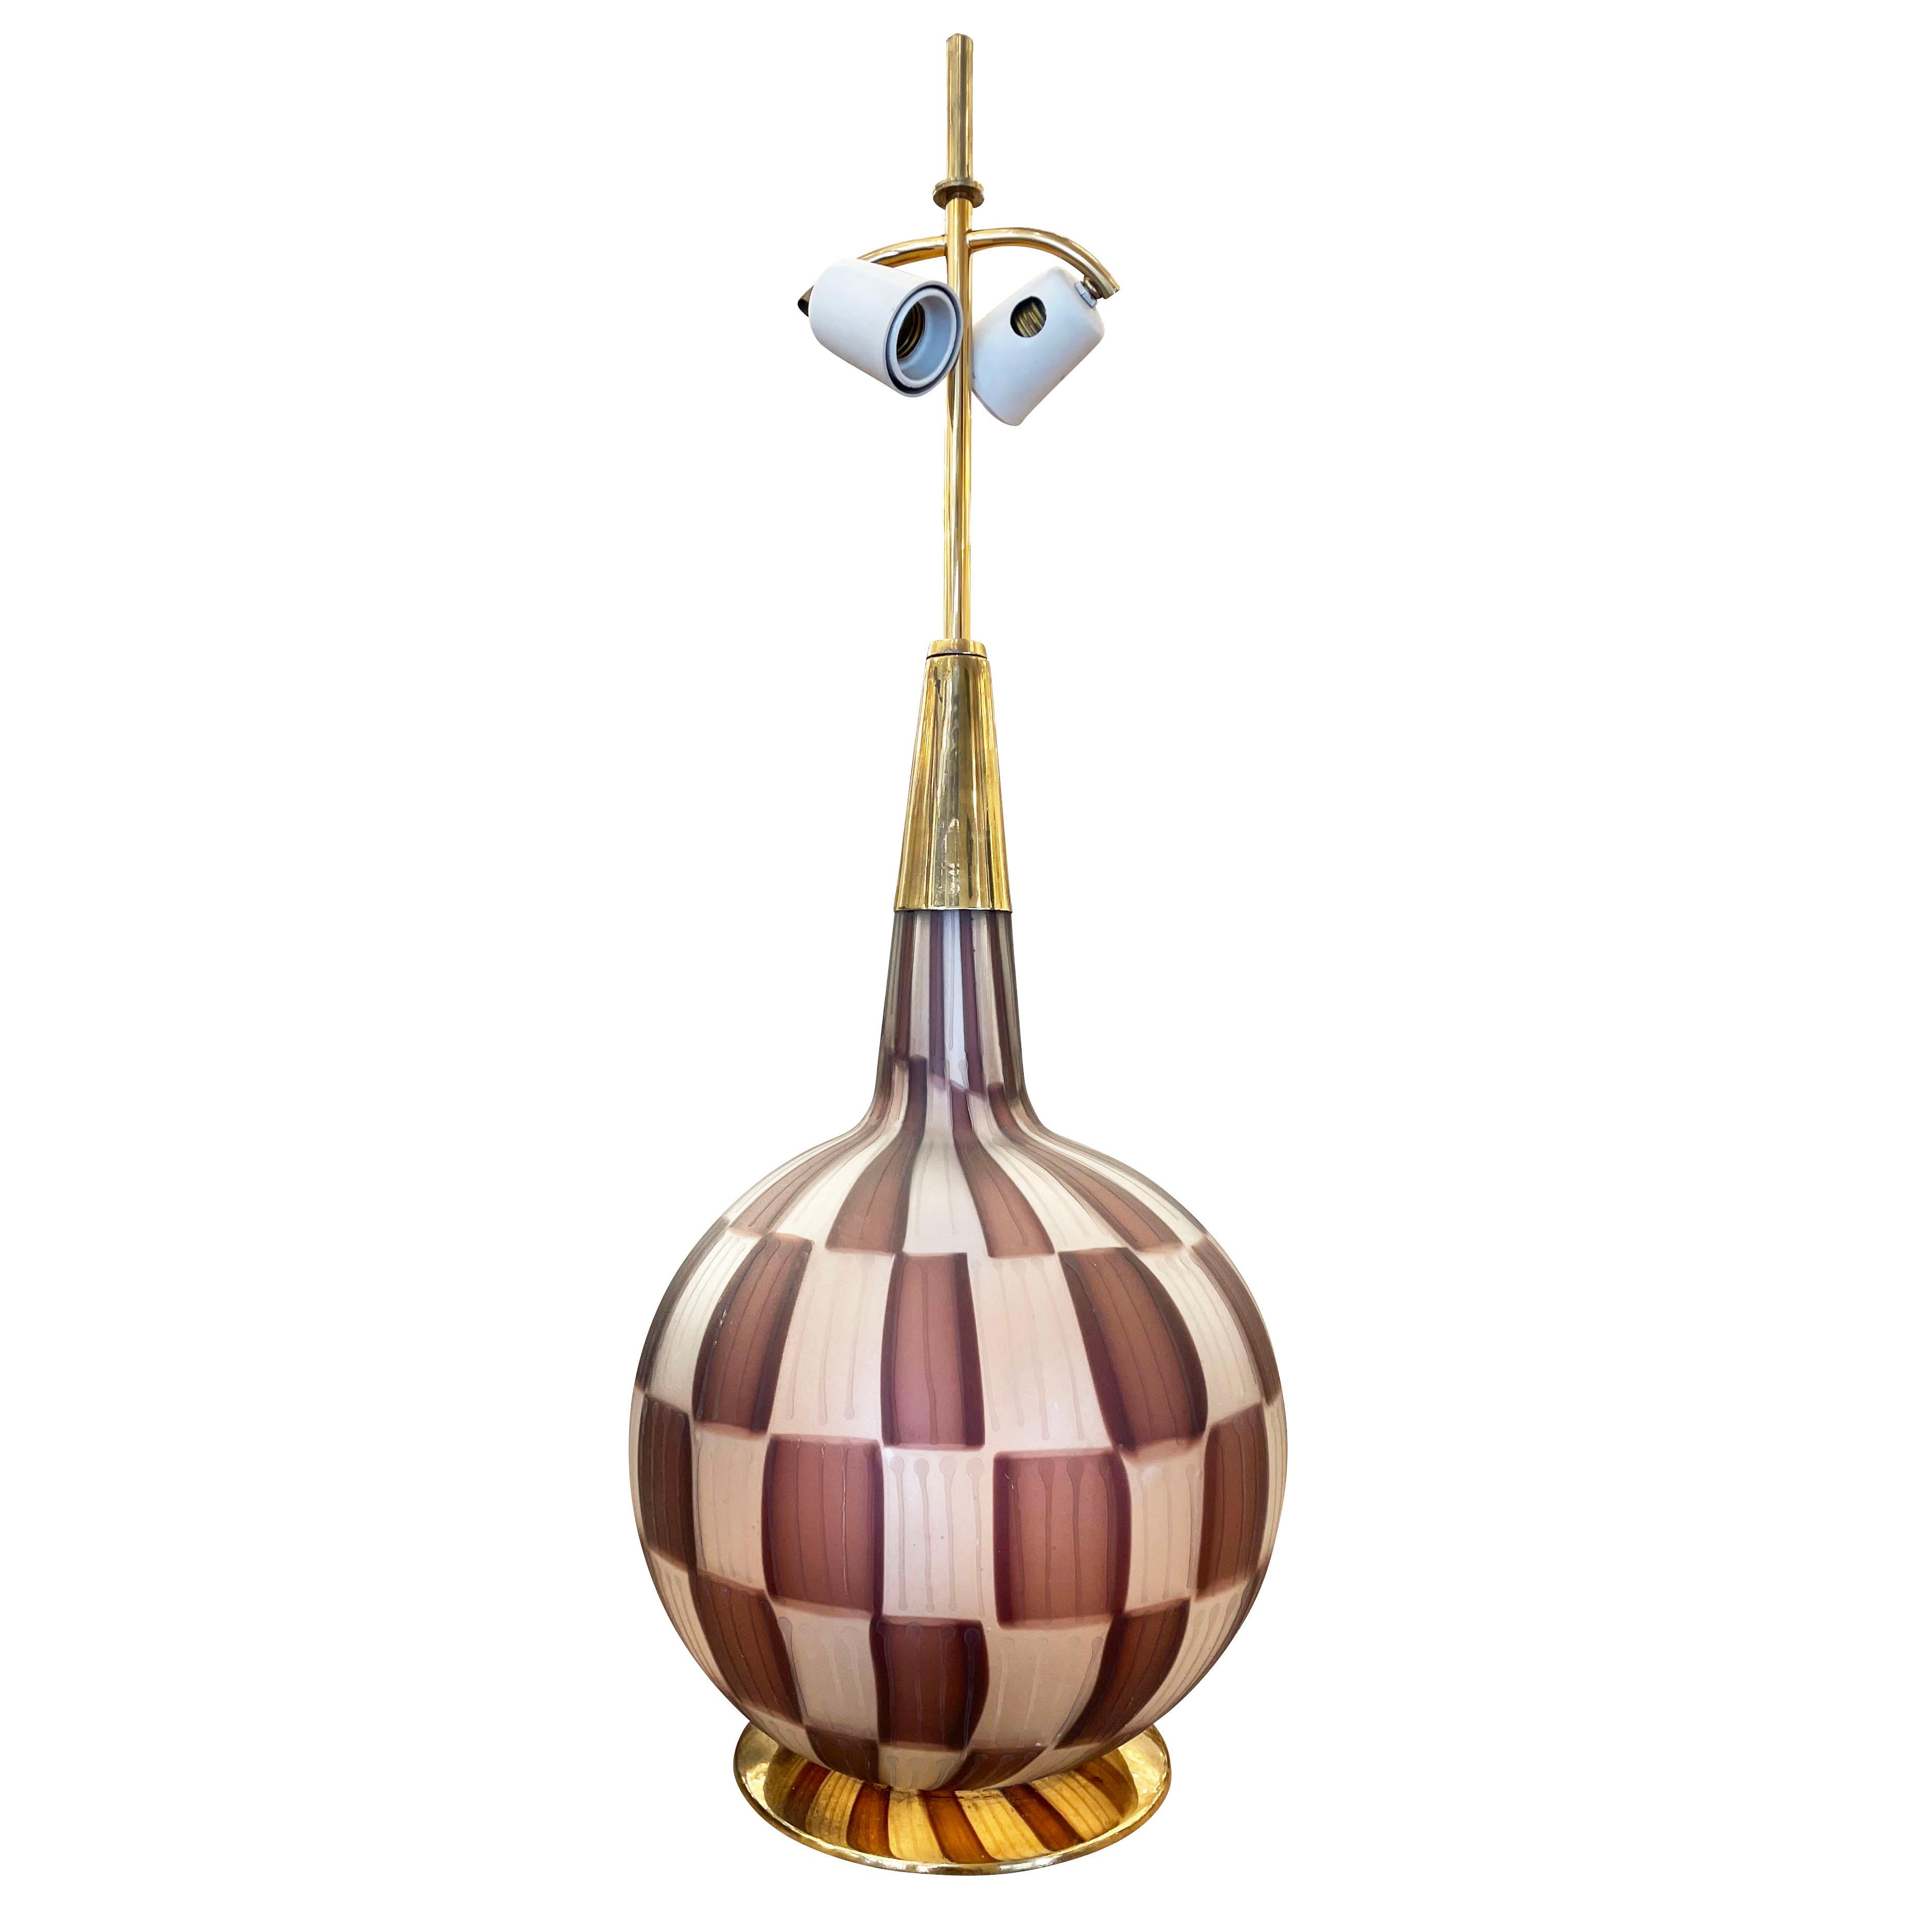 Large Italian mid-century table lamp which was the result of a collaboration between Stilnovo (marked) and Ercole Barovier. The glass handblown in the “pezzato” technique has alternating frosted and maroon squares while the hardware is brass. It has